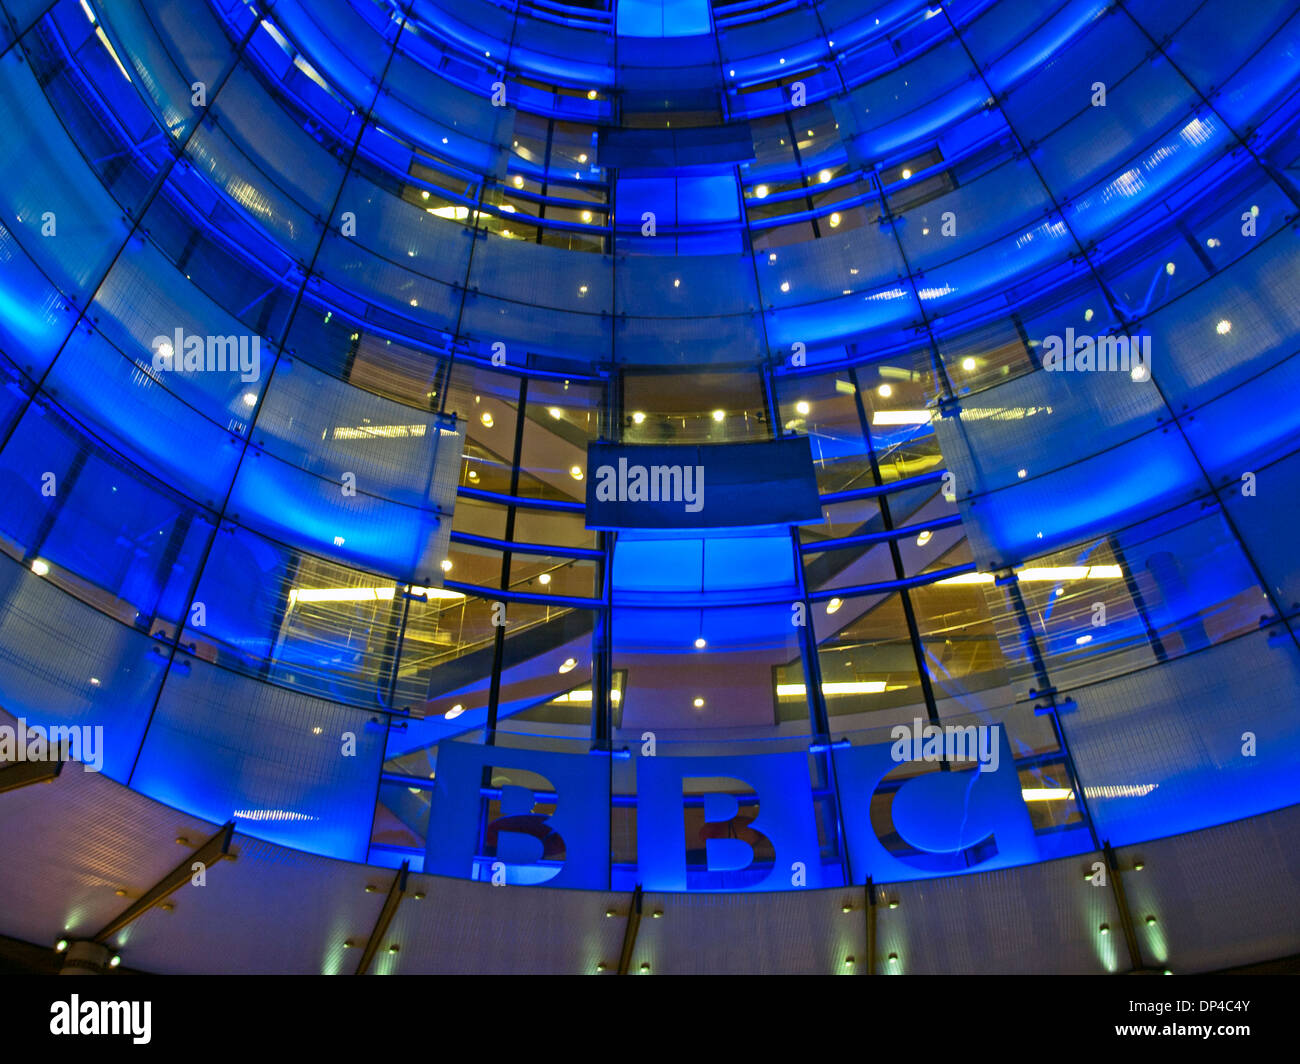 Facade of the new BBC building at night, London, England, United Kingdom Stock Photo